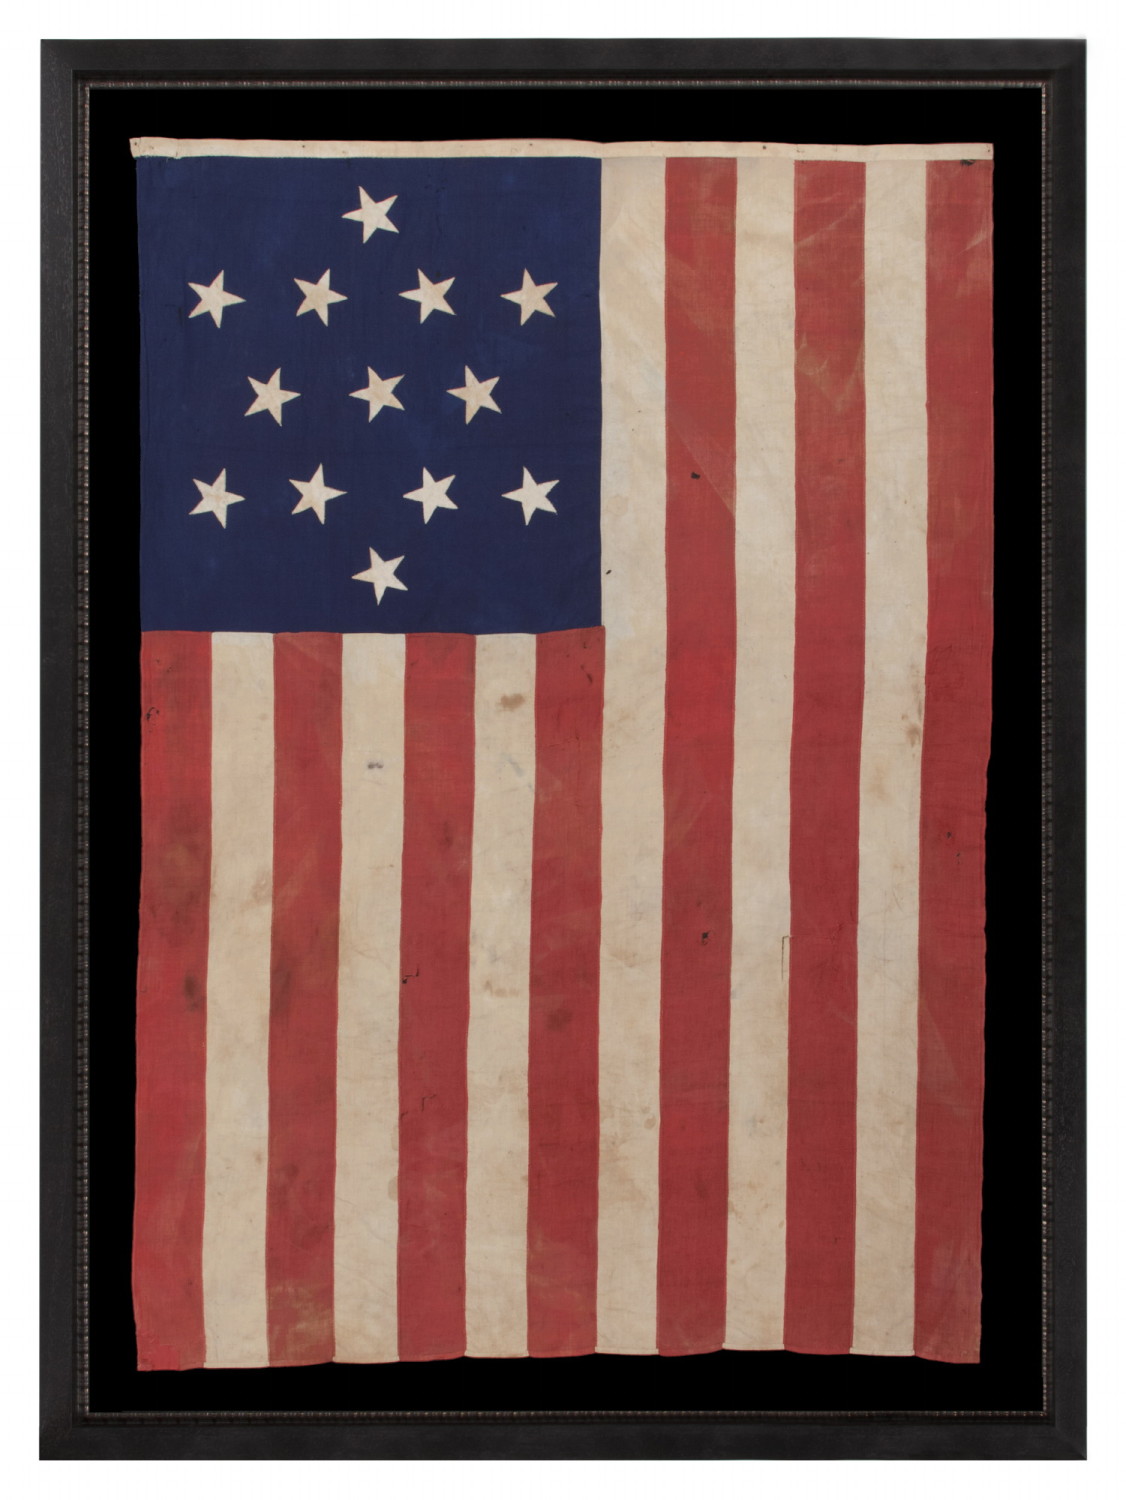 ENTIRELY HAND-SEWN 13 STAR FLAG WITH A 6-POINTED GREAT STAR / STAR OF DAVID PATTERN, ONE OF A TINY HANDFUL OF PIECED-AND-SEWN EXAMPLES WITH THIS EXTRAORDINARILY RARE STAR DESIGN, MADE DURING THE CIVIL WAR ERA